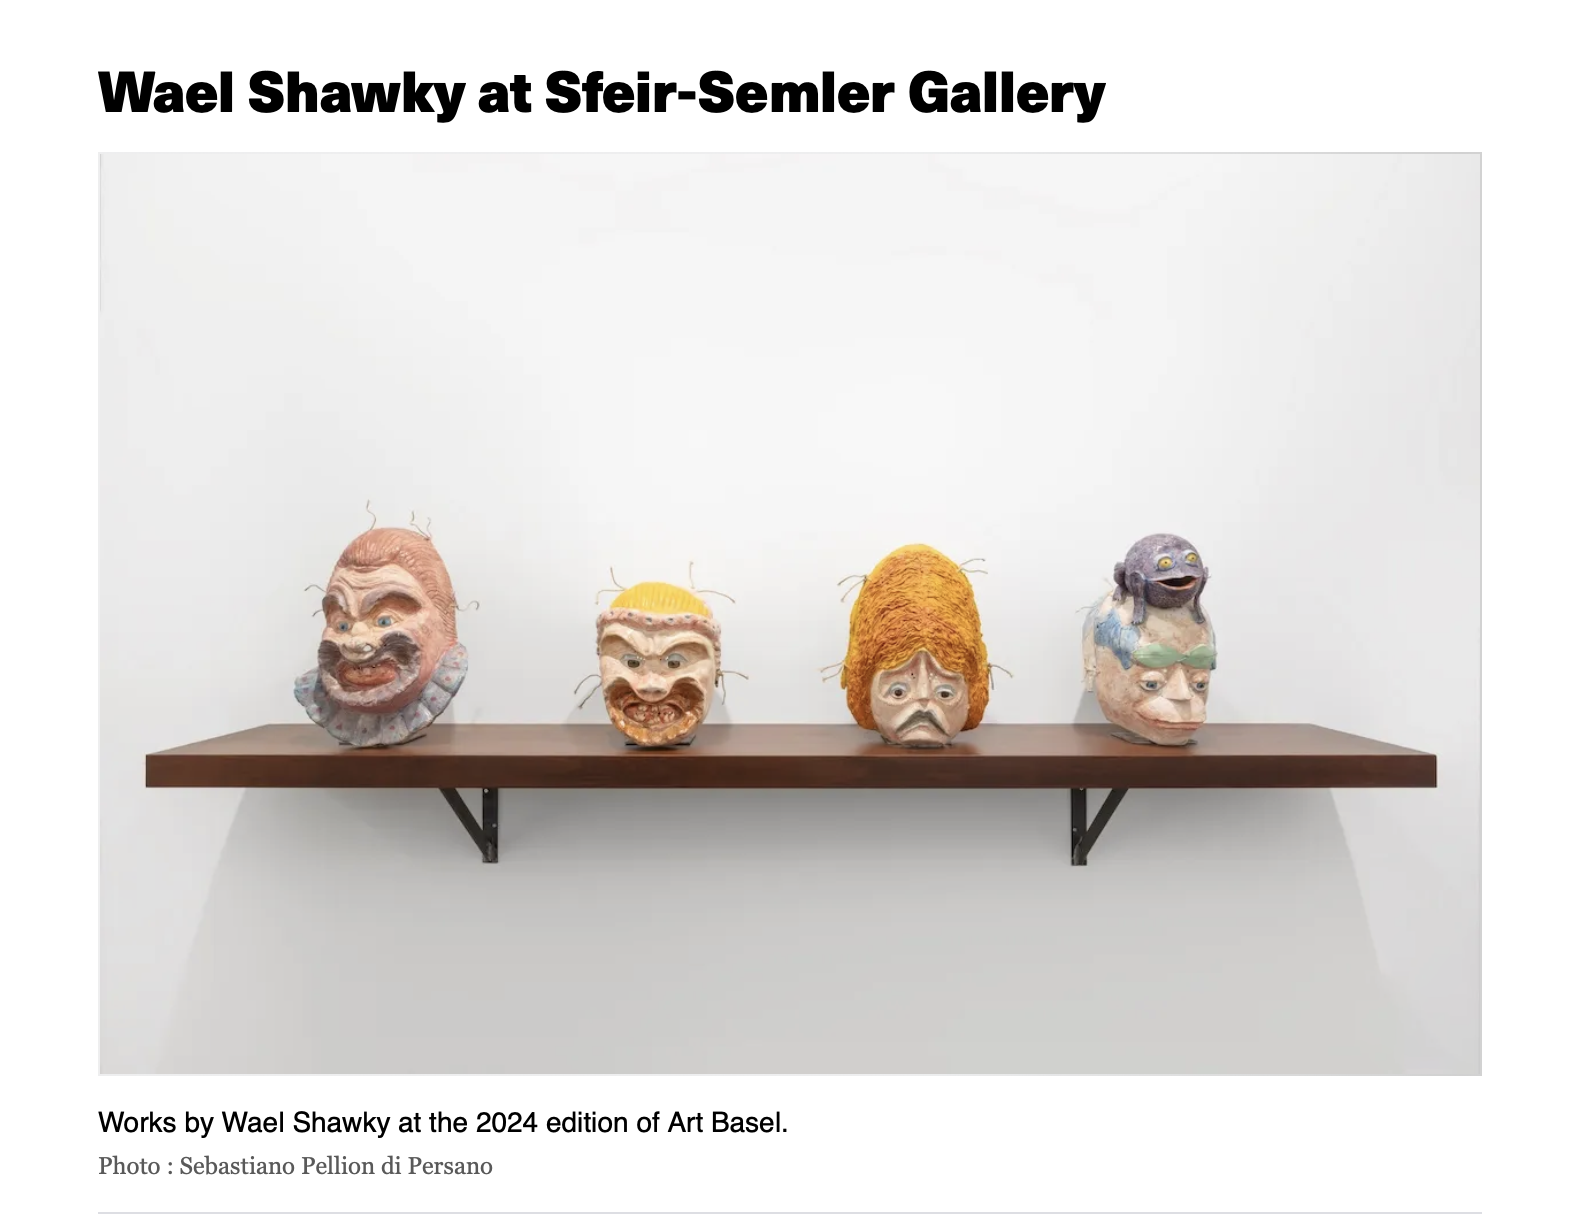 Wael Shawky « The Best Booths at Art Basel, From a Revisionist ‘Origine du Monde’ to Jellyfish-Like Creatures » | via artnews, June 12, 2024